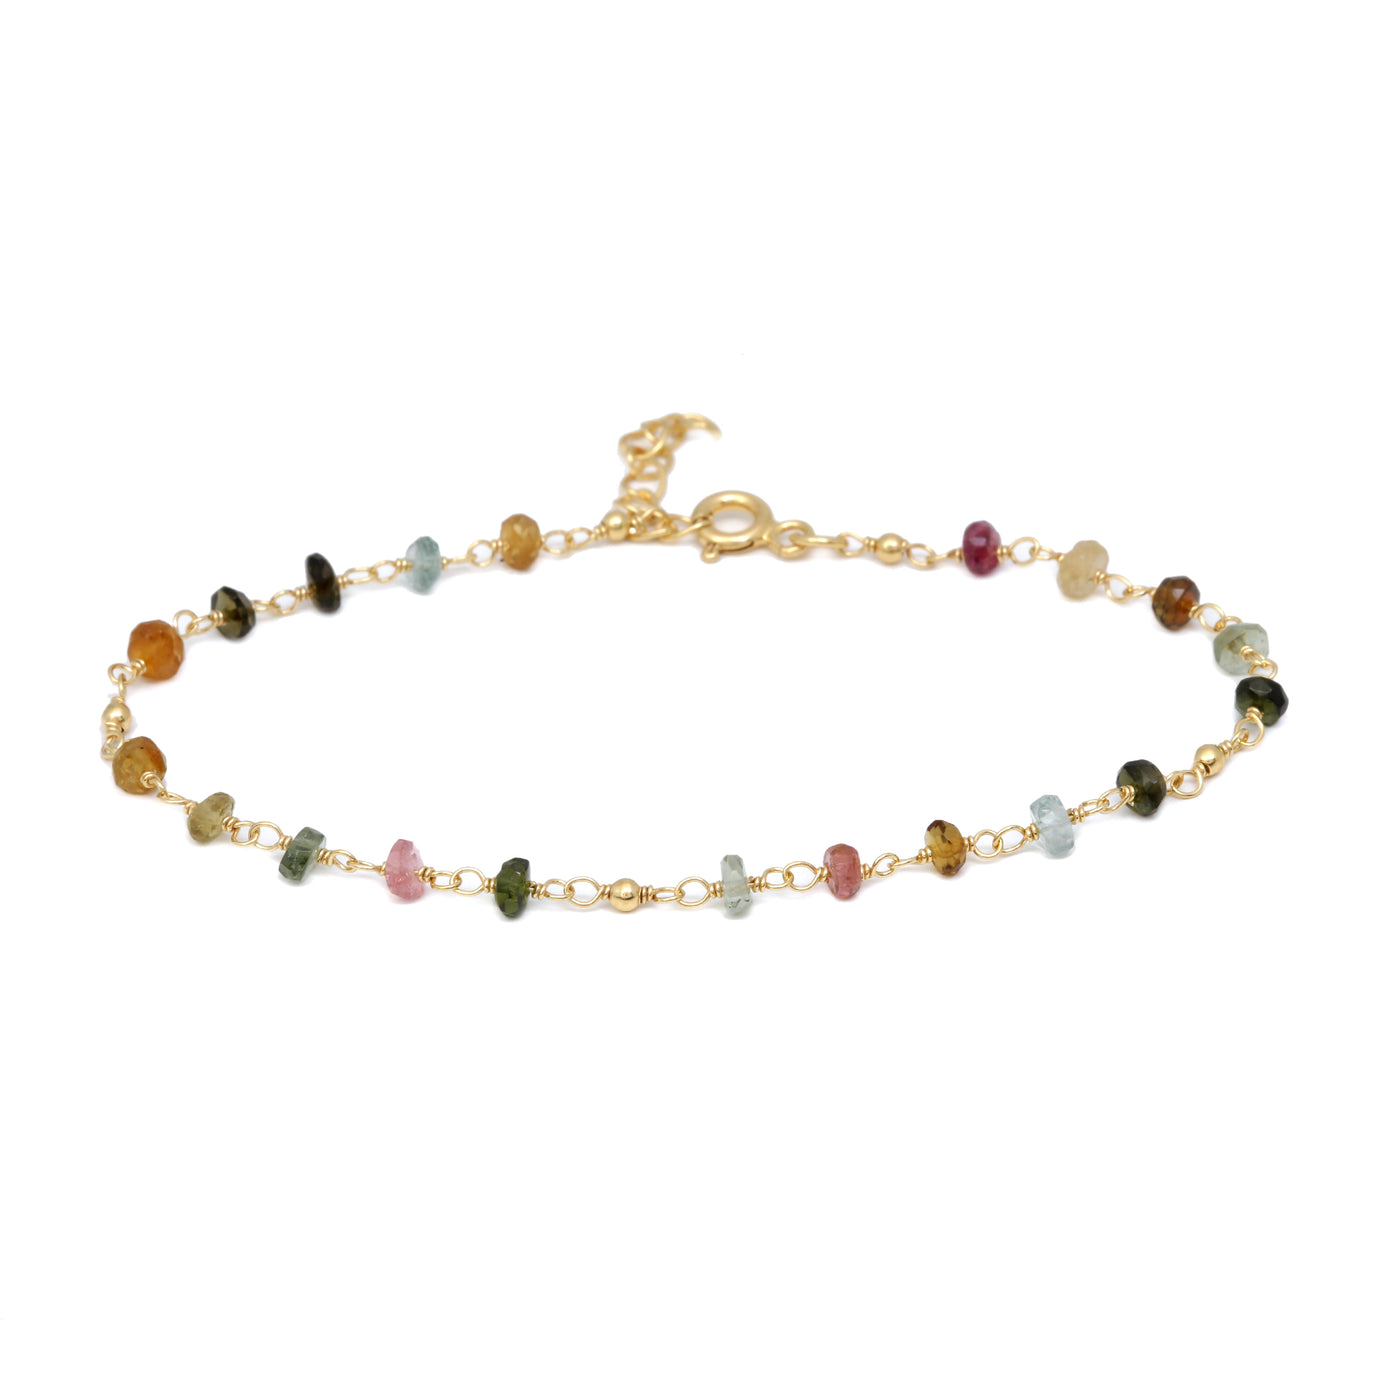 Mira handcrafted bracelet, gold plated, silver, semi precious stone